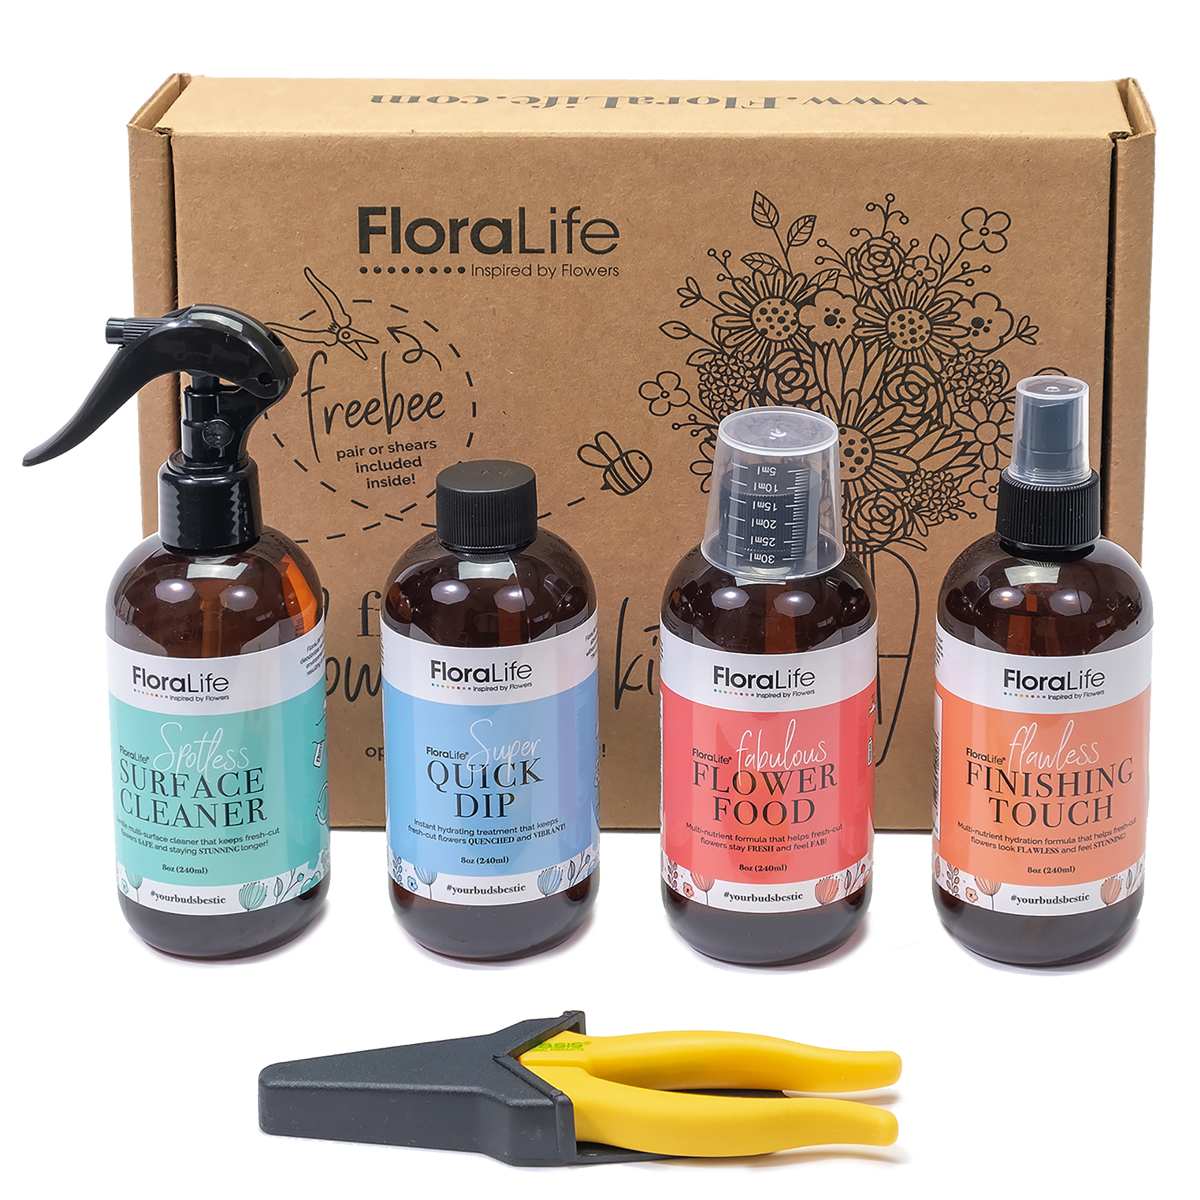  FloraLife Quick Dip, Finishing Touch Spray & Flower